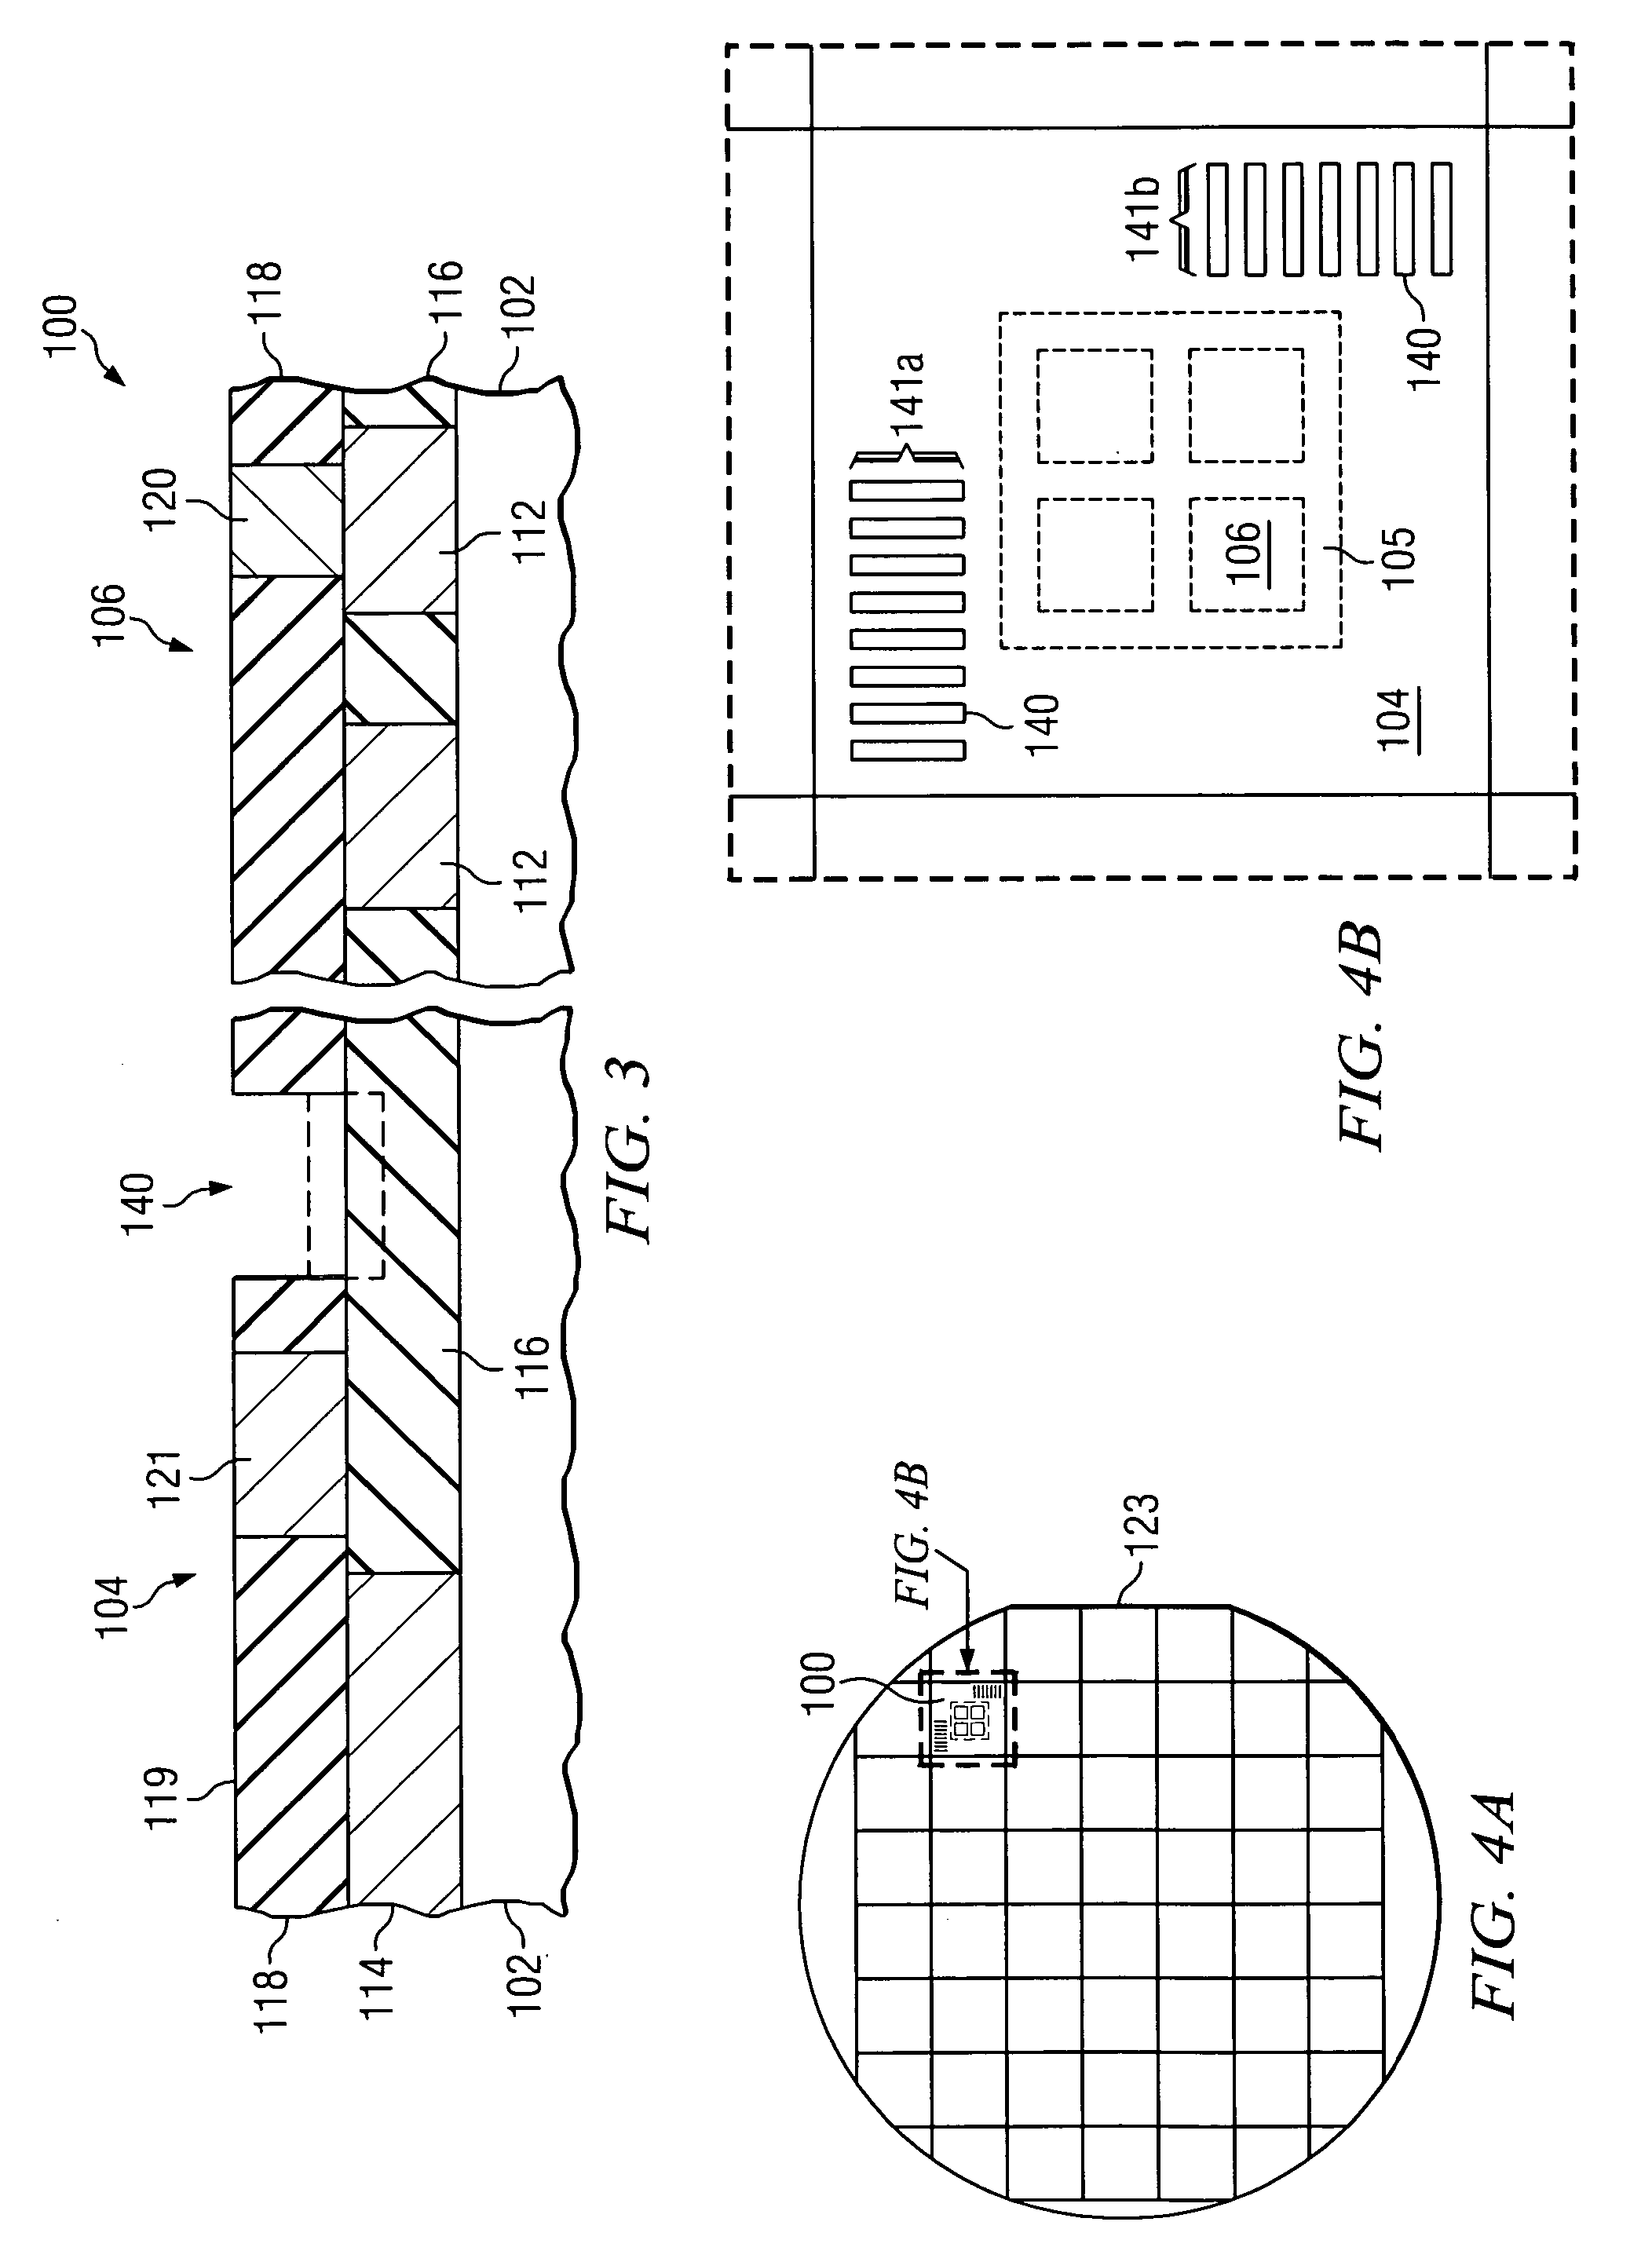 Alignment of MTJ stack to conductive lines in the absence of topography